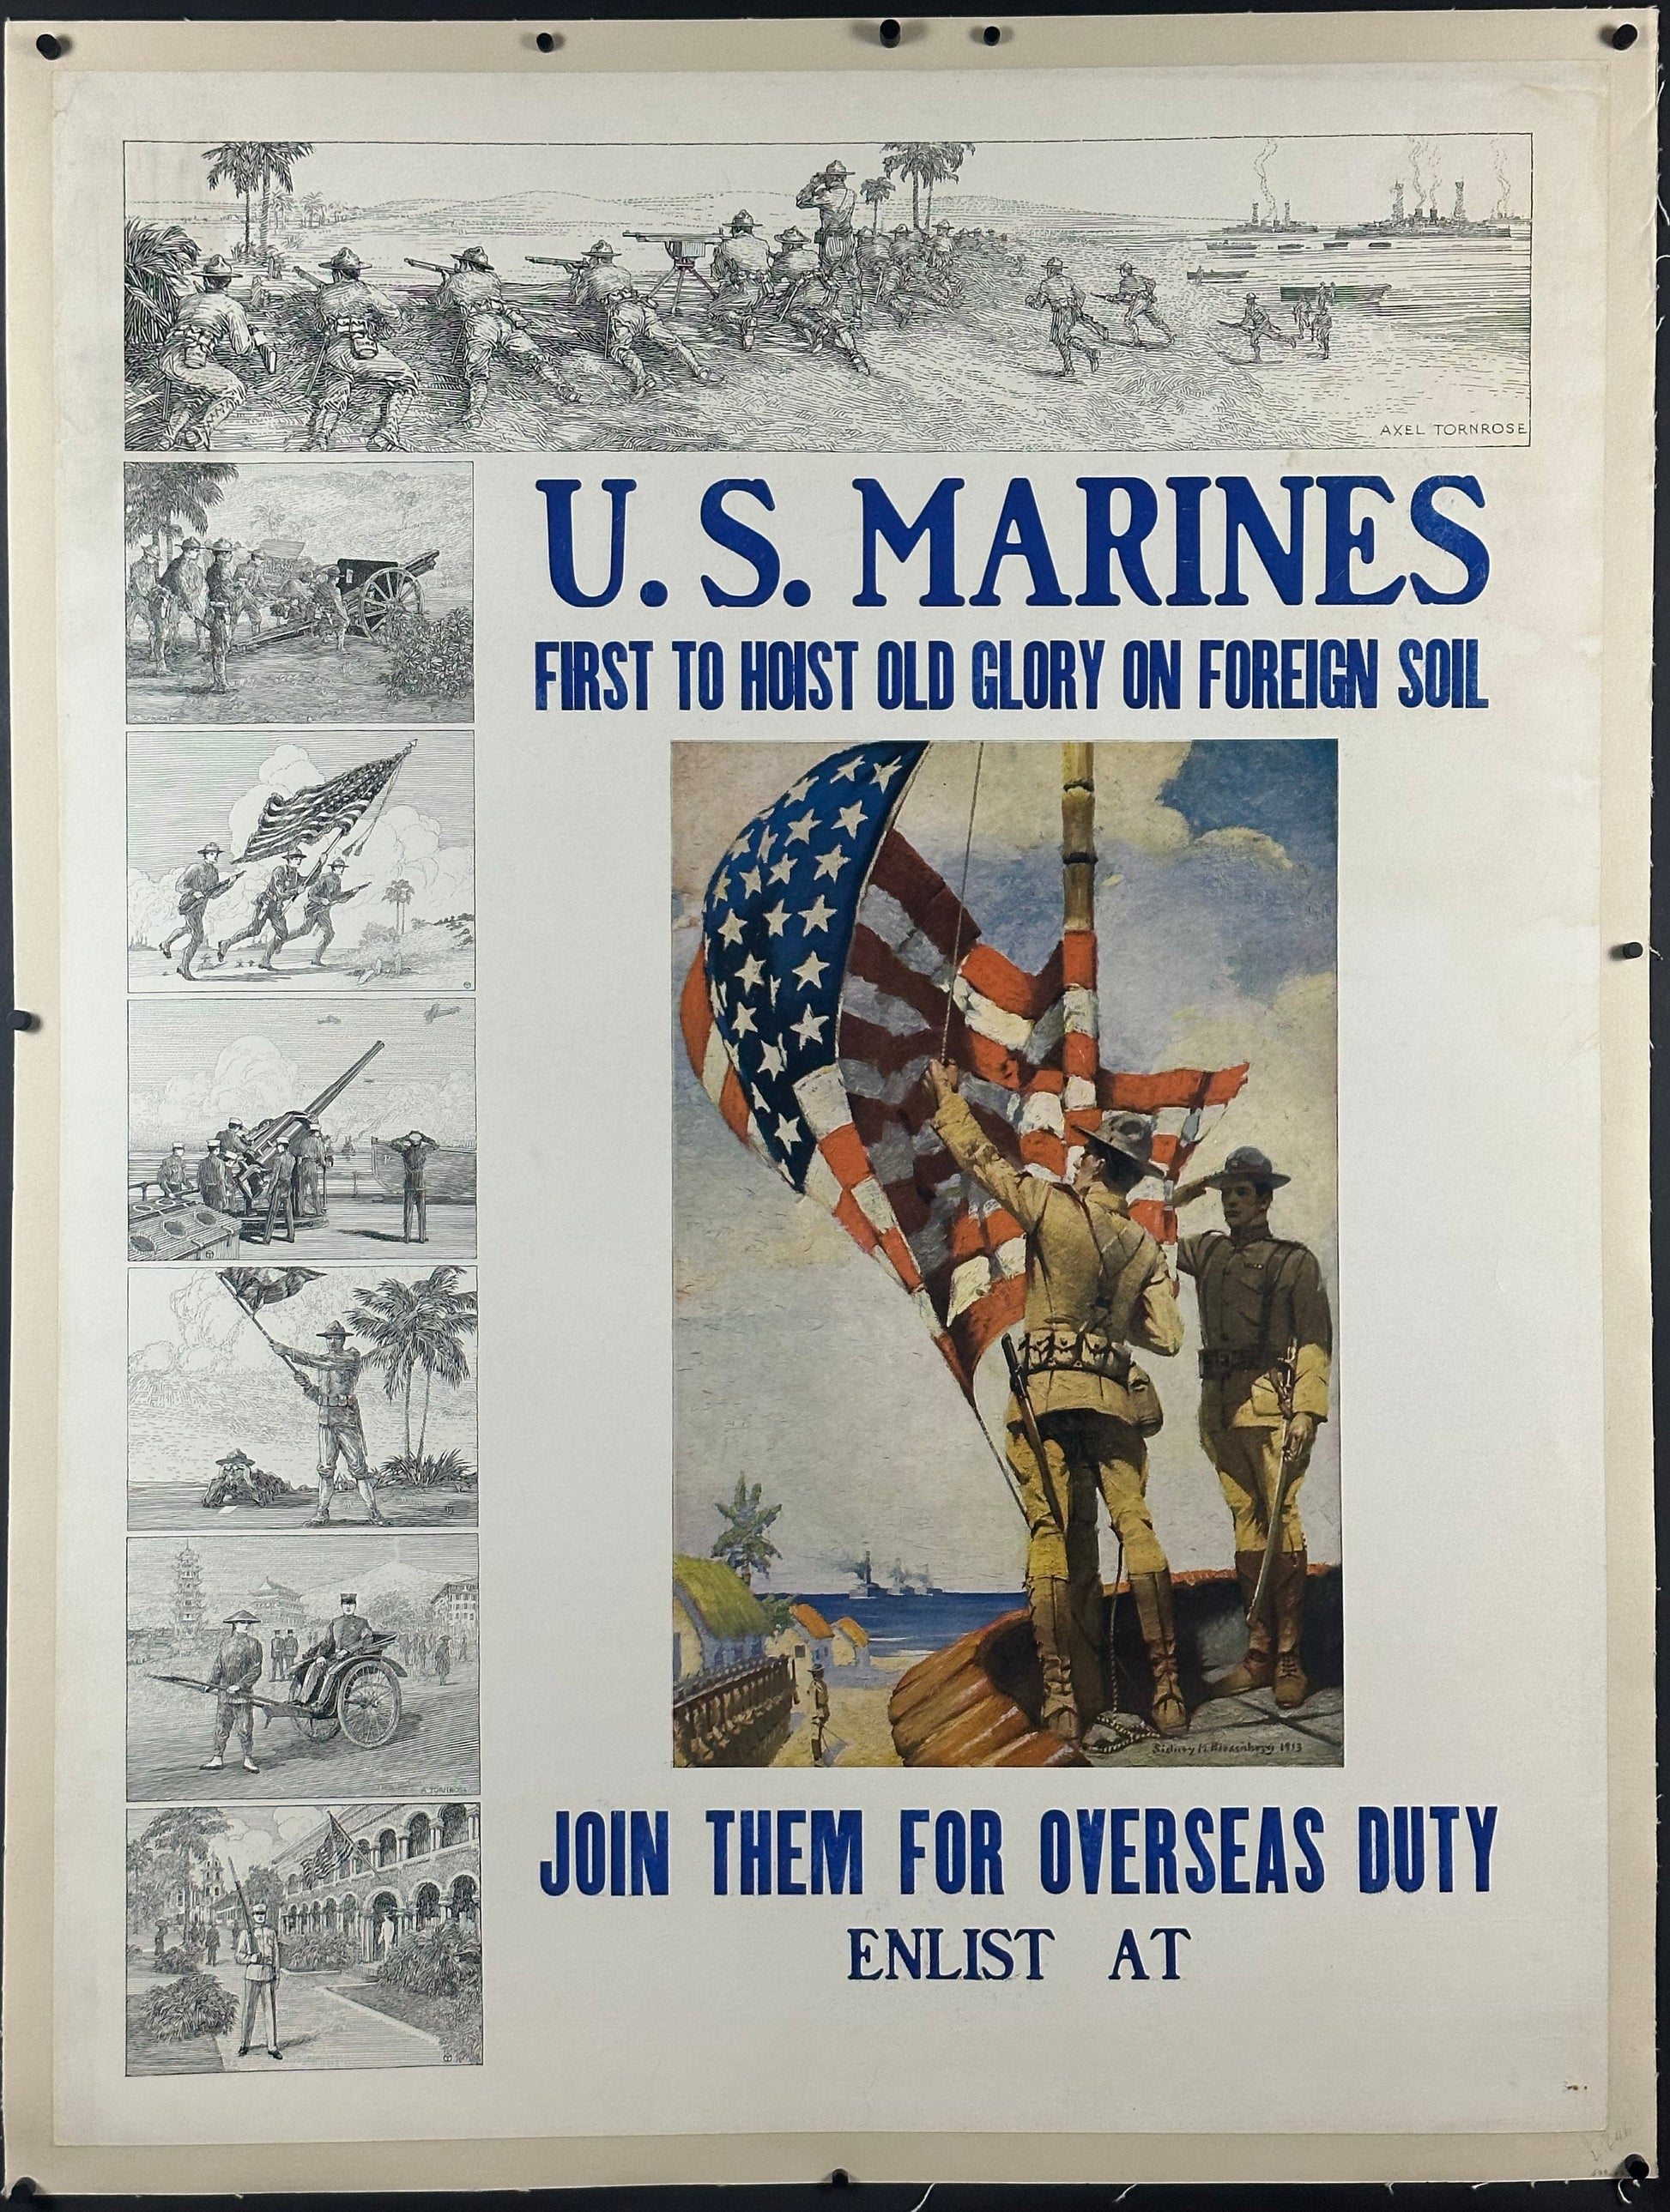 "US Marines First To Hoist Old Glory" Marines Recruitment Poster by Sidney Riesenberg & Axel Tornrose (c. 1913) - posterpalace.com